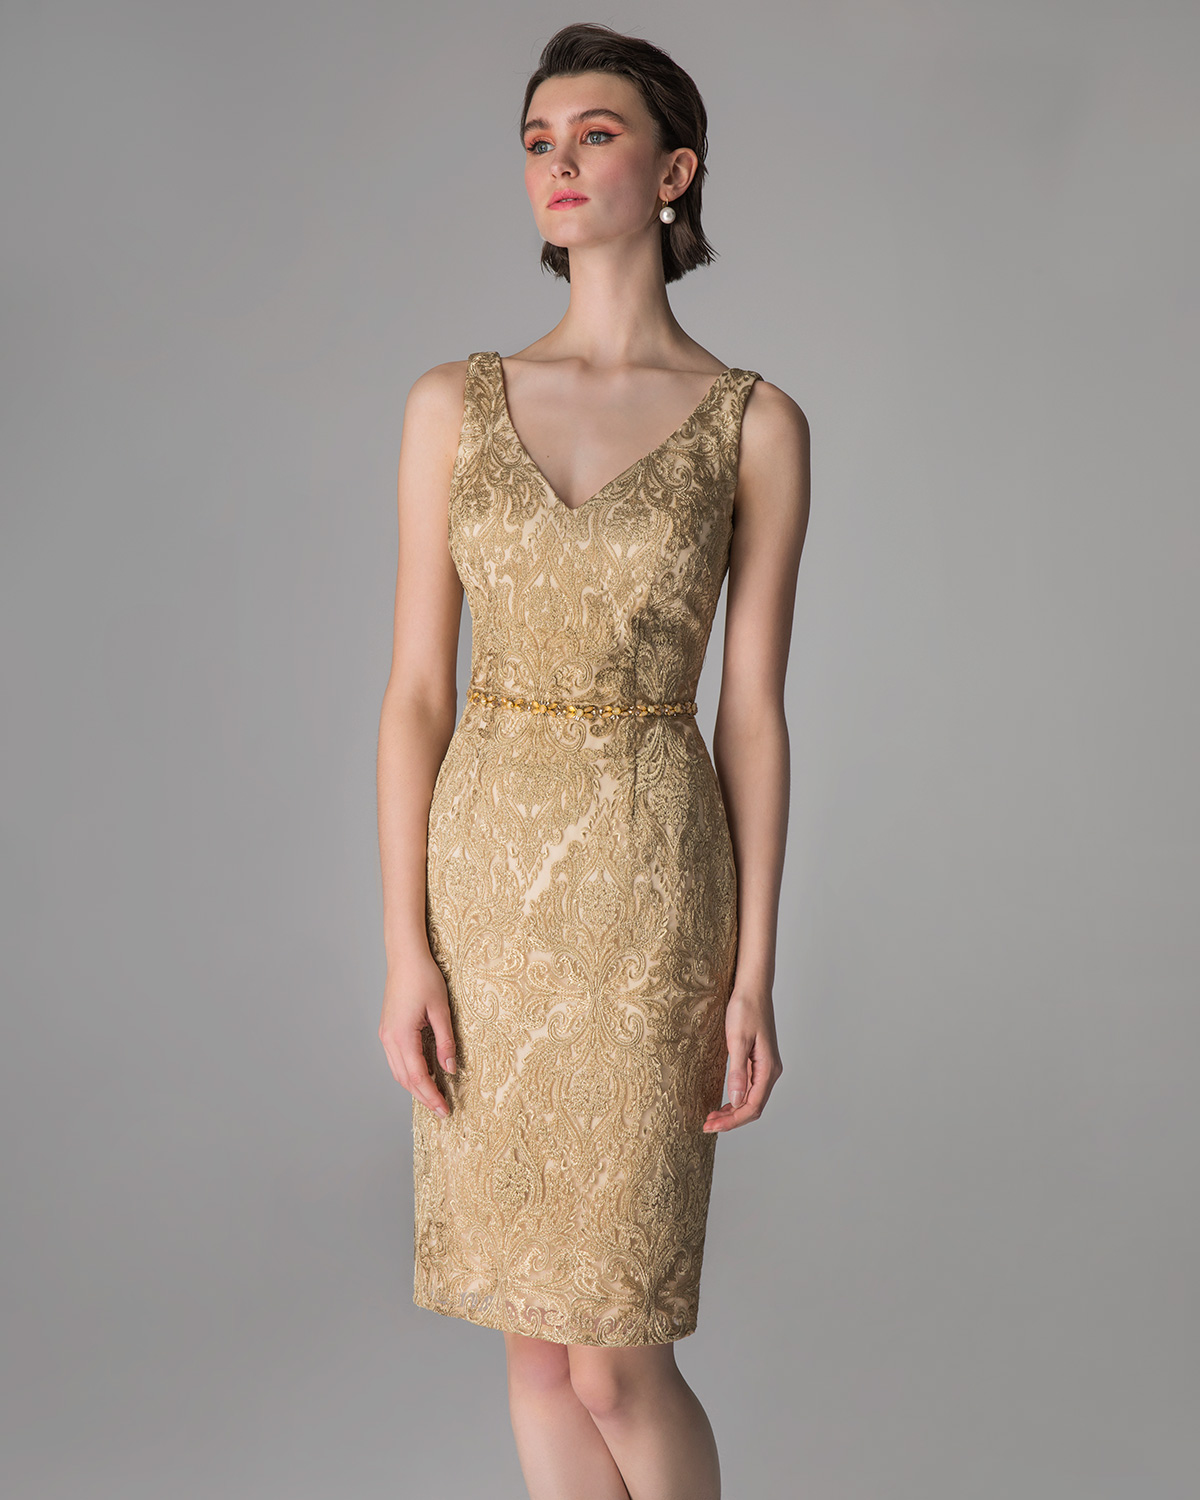 Classic Dresses / Short lace dress for mother of the bride  with beading around the waist